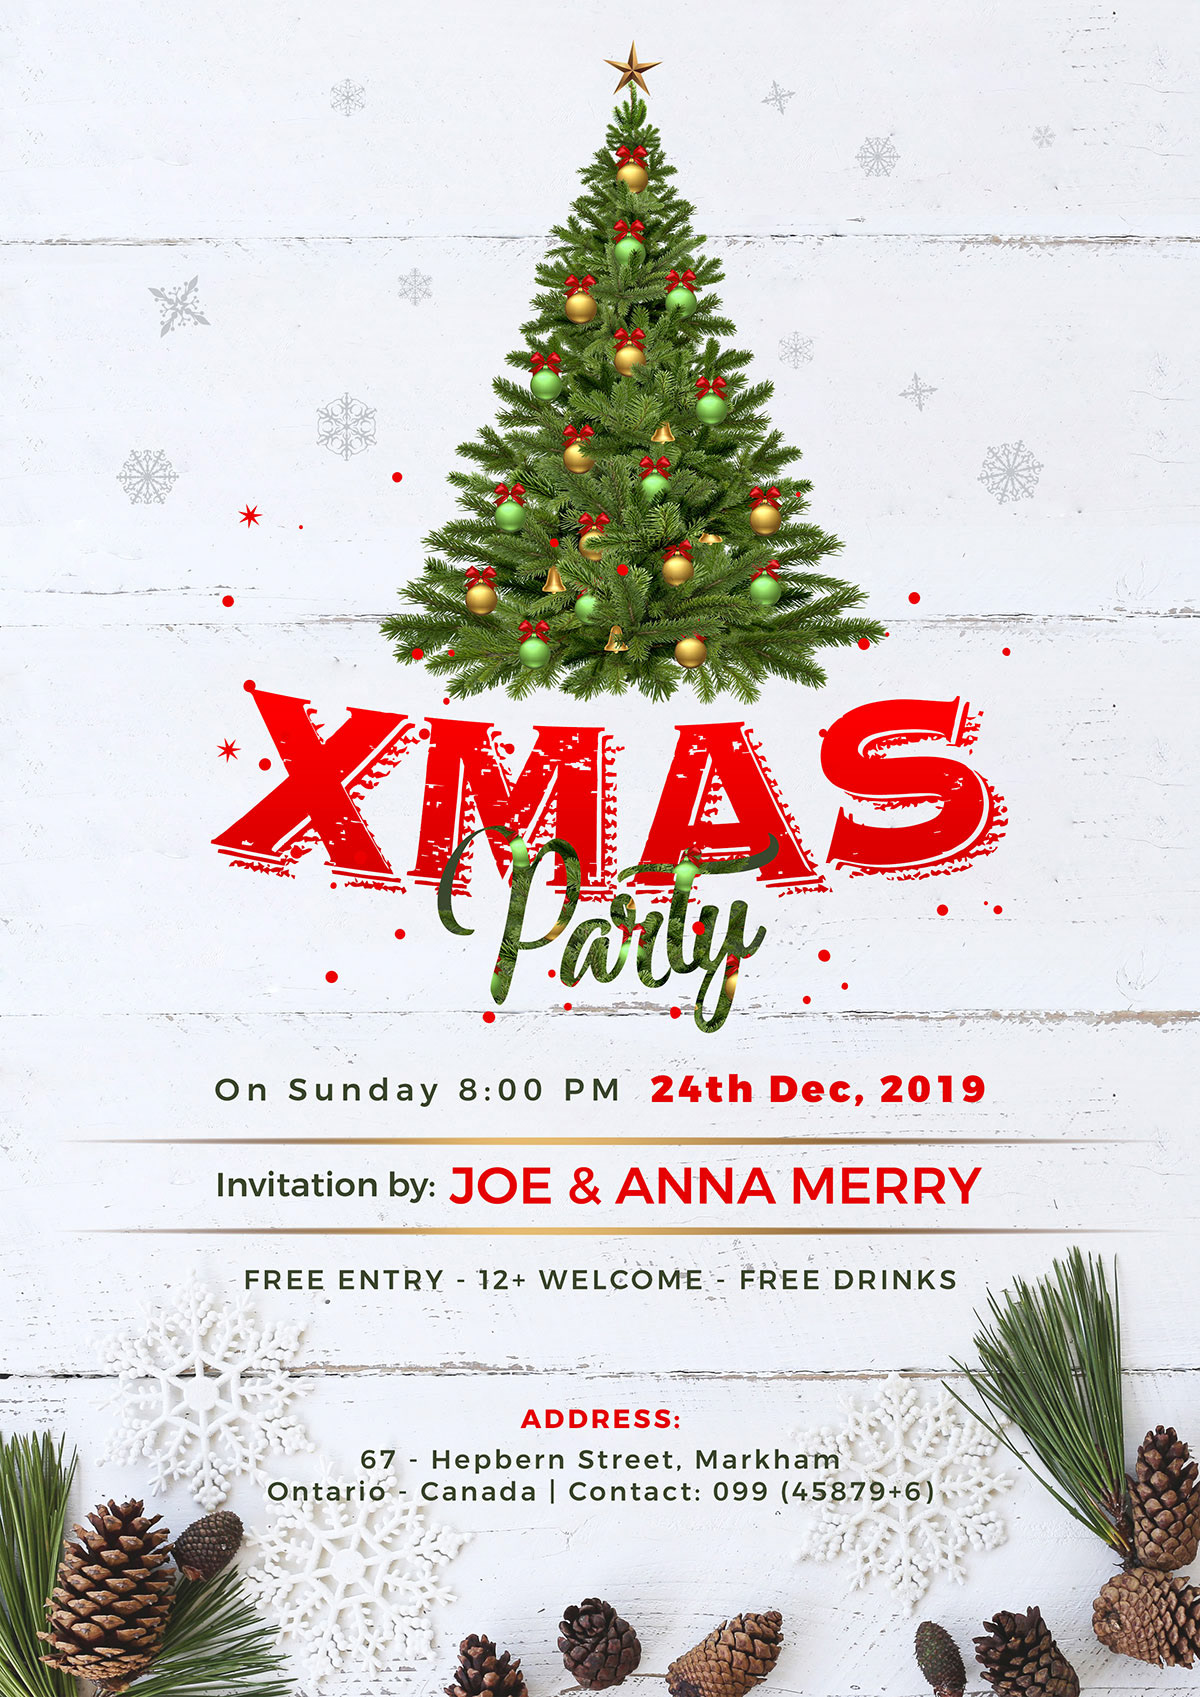 Free Christmas Party Flyer Design Template 2019 in PSD on Behance